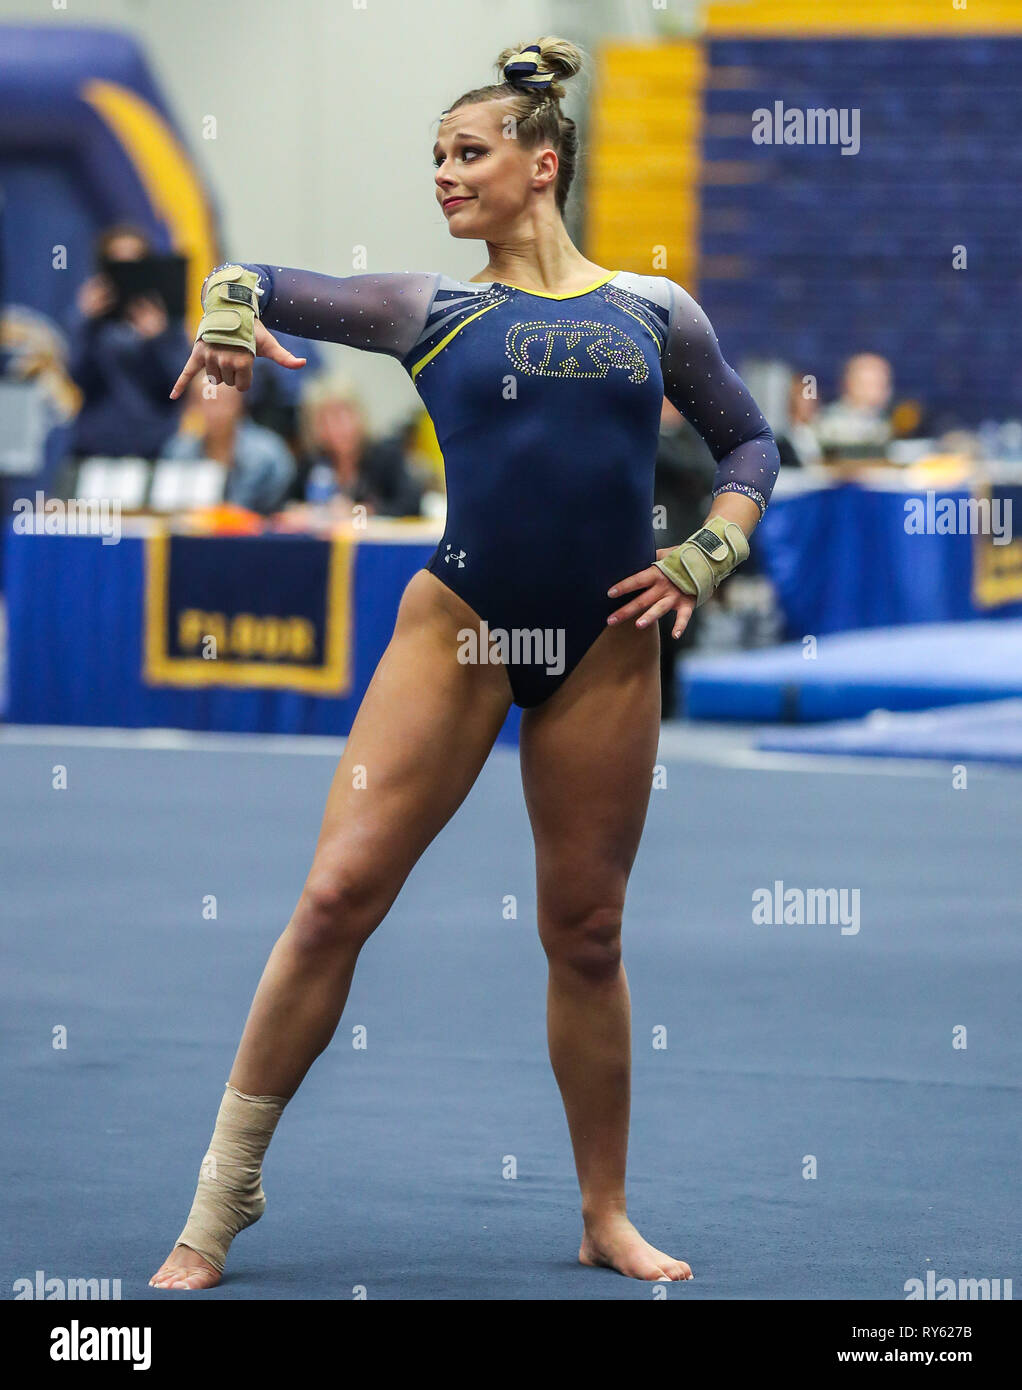 Kent, OH, USA. 10th Mar, 2019. Kent State's Abby Fletcher completes her floor routine during the NCAA Women's Gymnastics quad meet between Kent State Flashes, UNC Tar Heels, Rutgers Scarlet Knights, and Ball State Cardinals at the MAC Center in Kent, OH. Kyle Okita/CSM/Alamy Live News Stock Photo